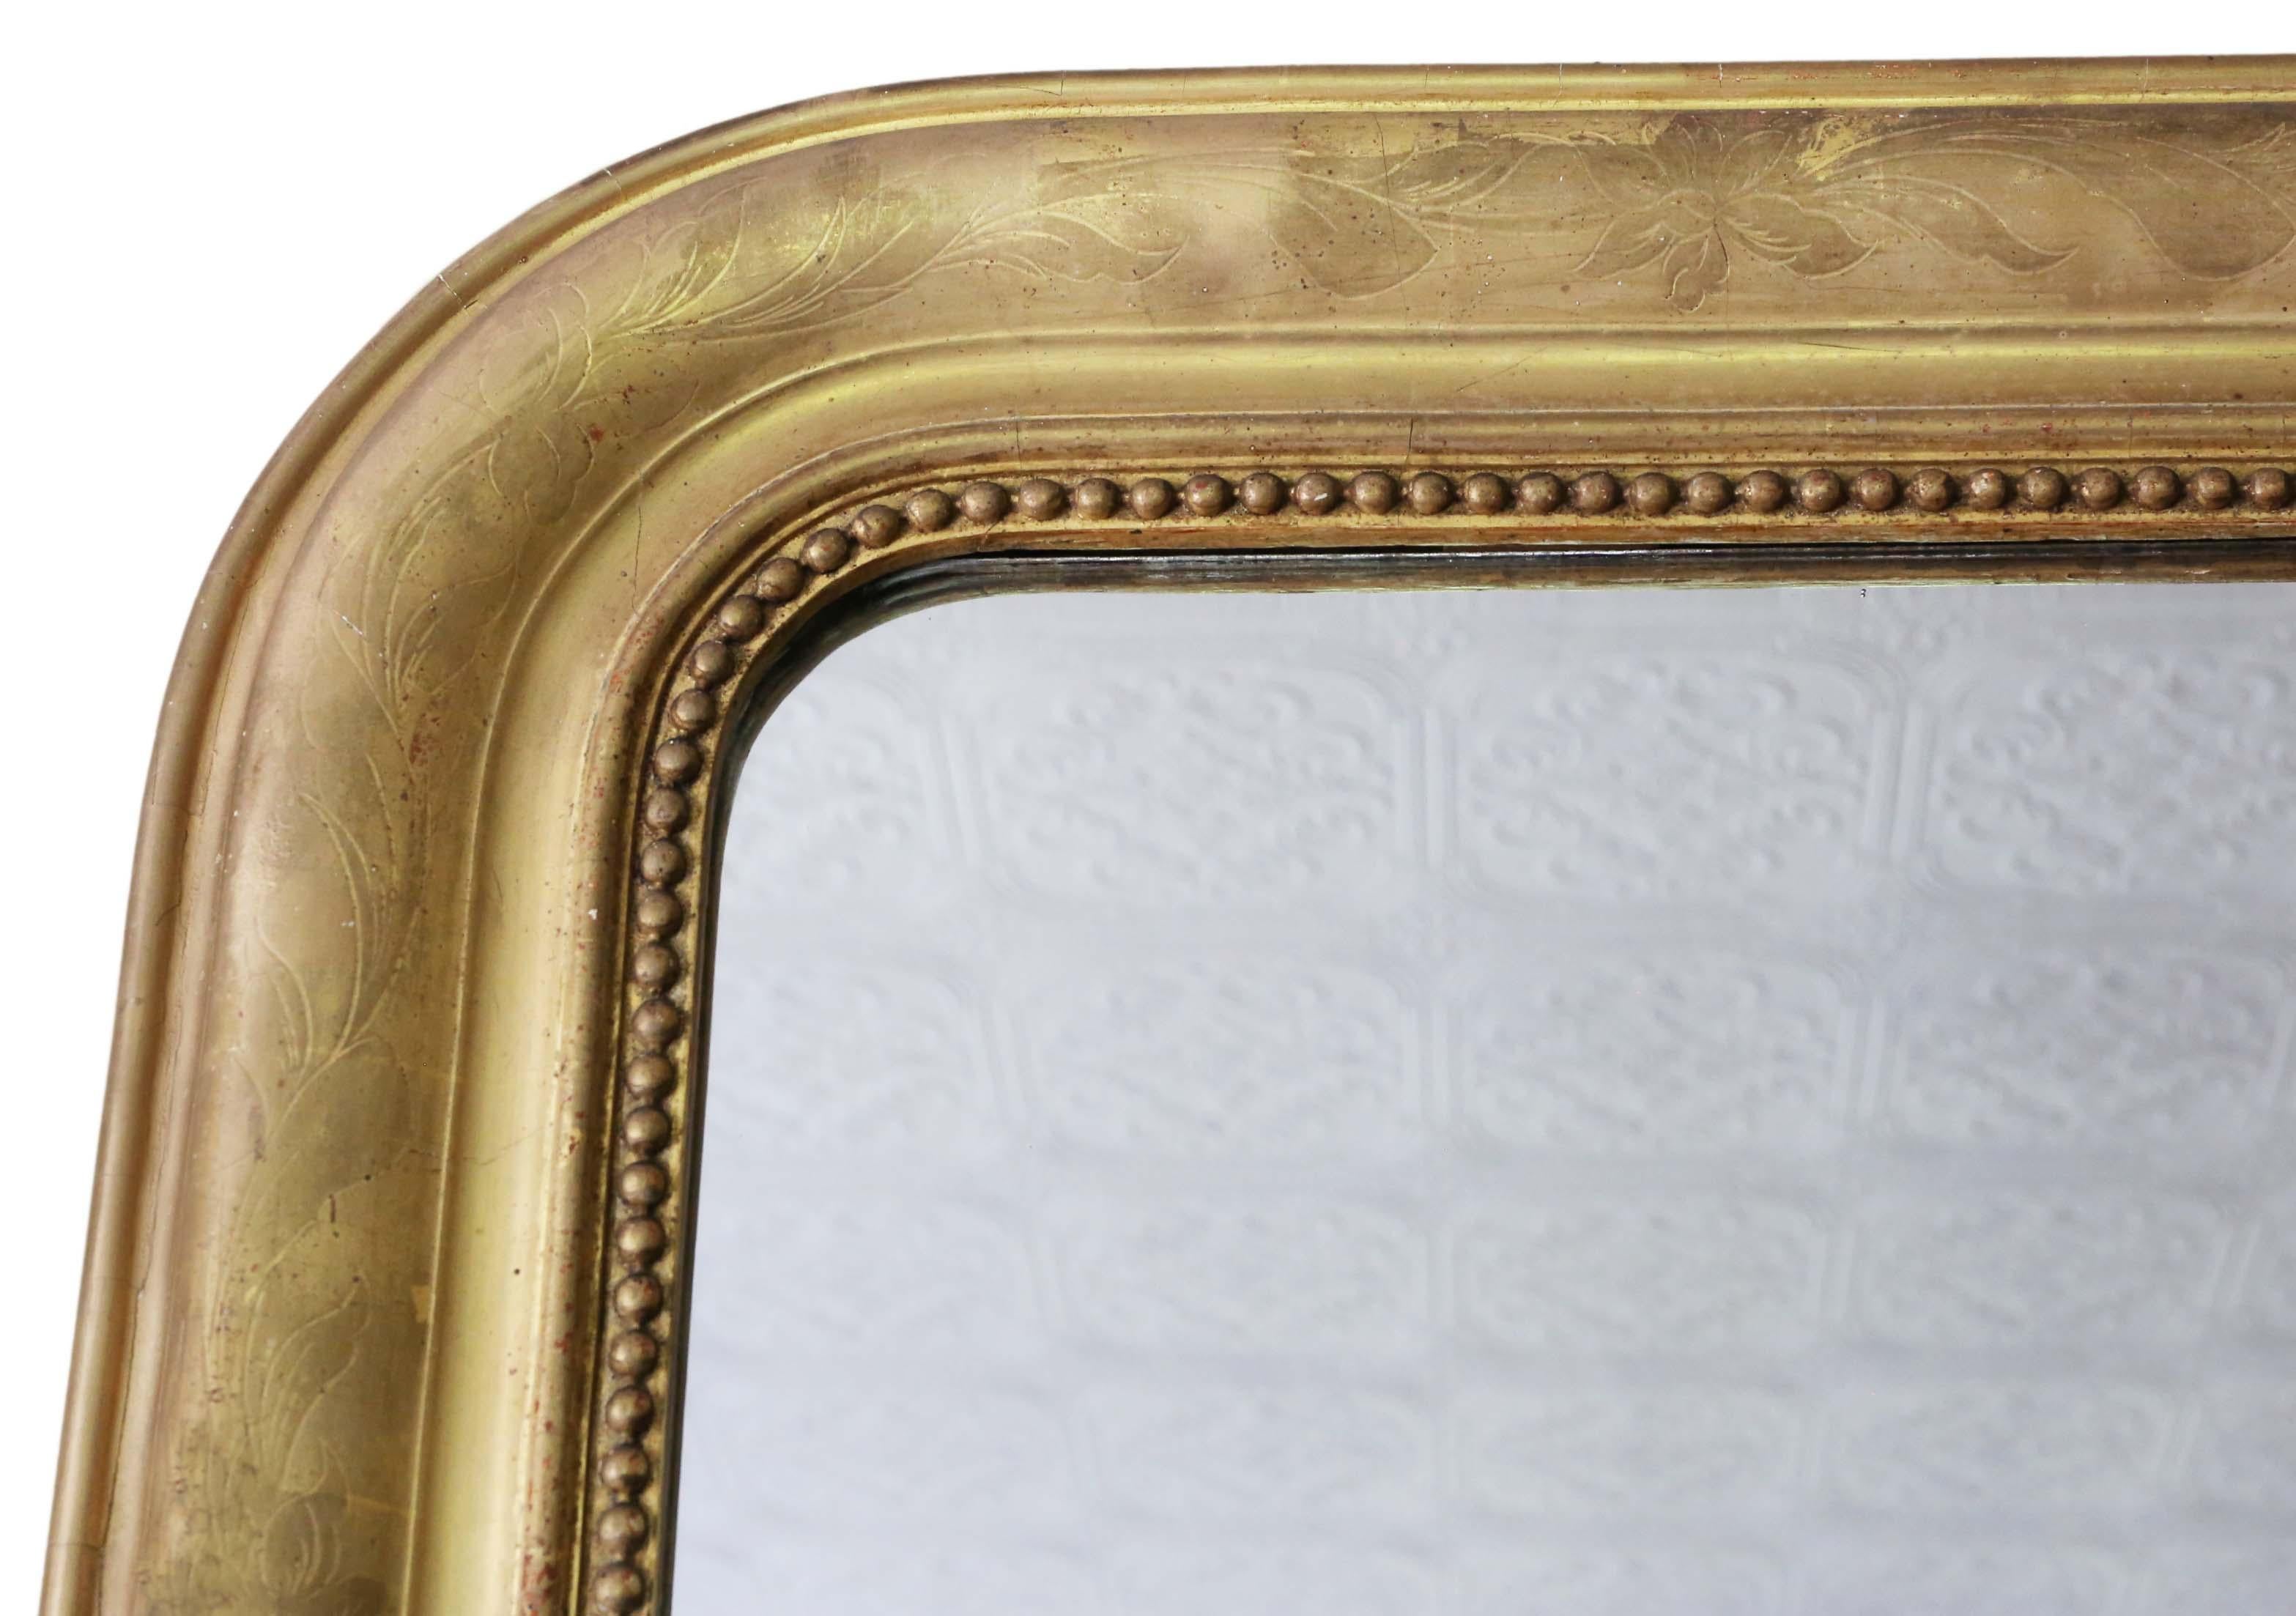 Antique quality Victorian gilt overmantle or wall mirror, circa 1890.
This is a lovely mirror, with some original gilding remaining.
Would look amazing in the right location. No woodworm.
The original mirrored glass with minor imperfections and